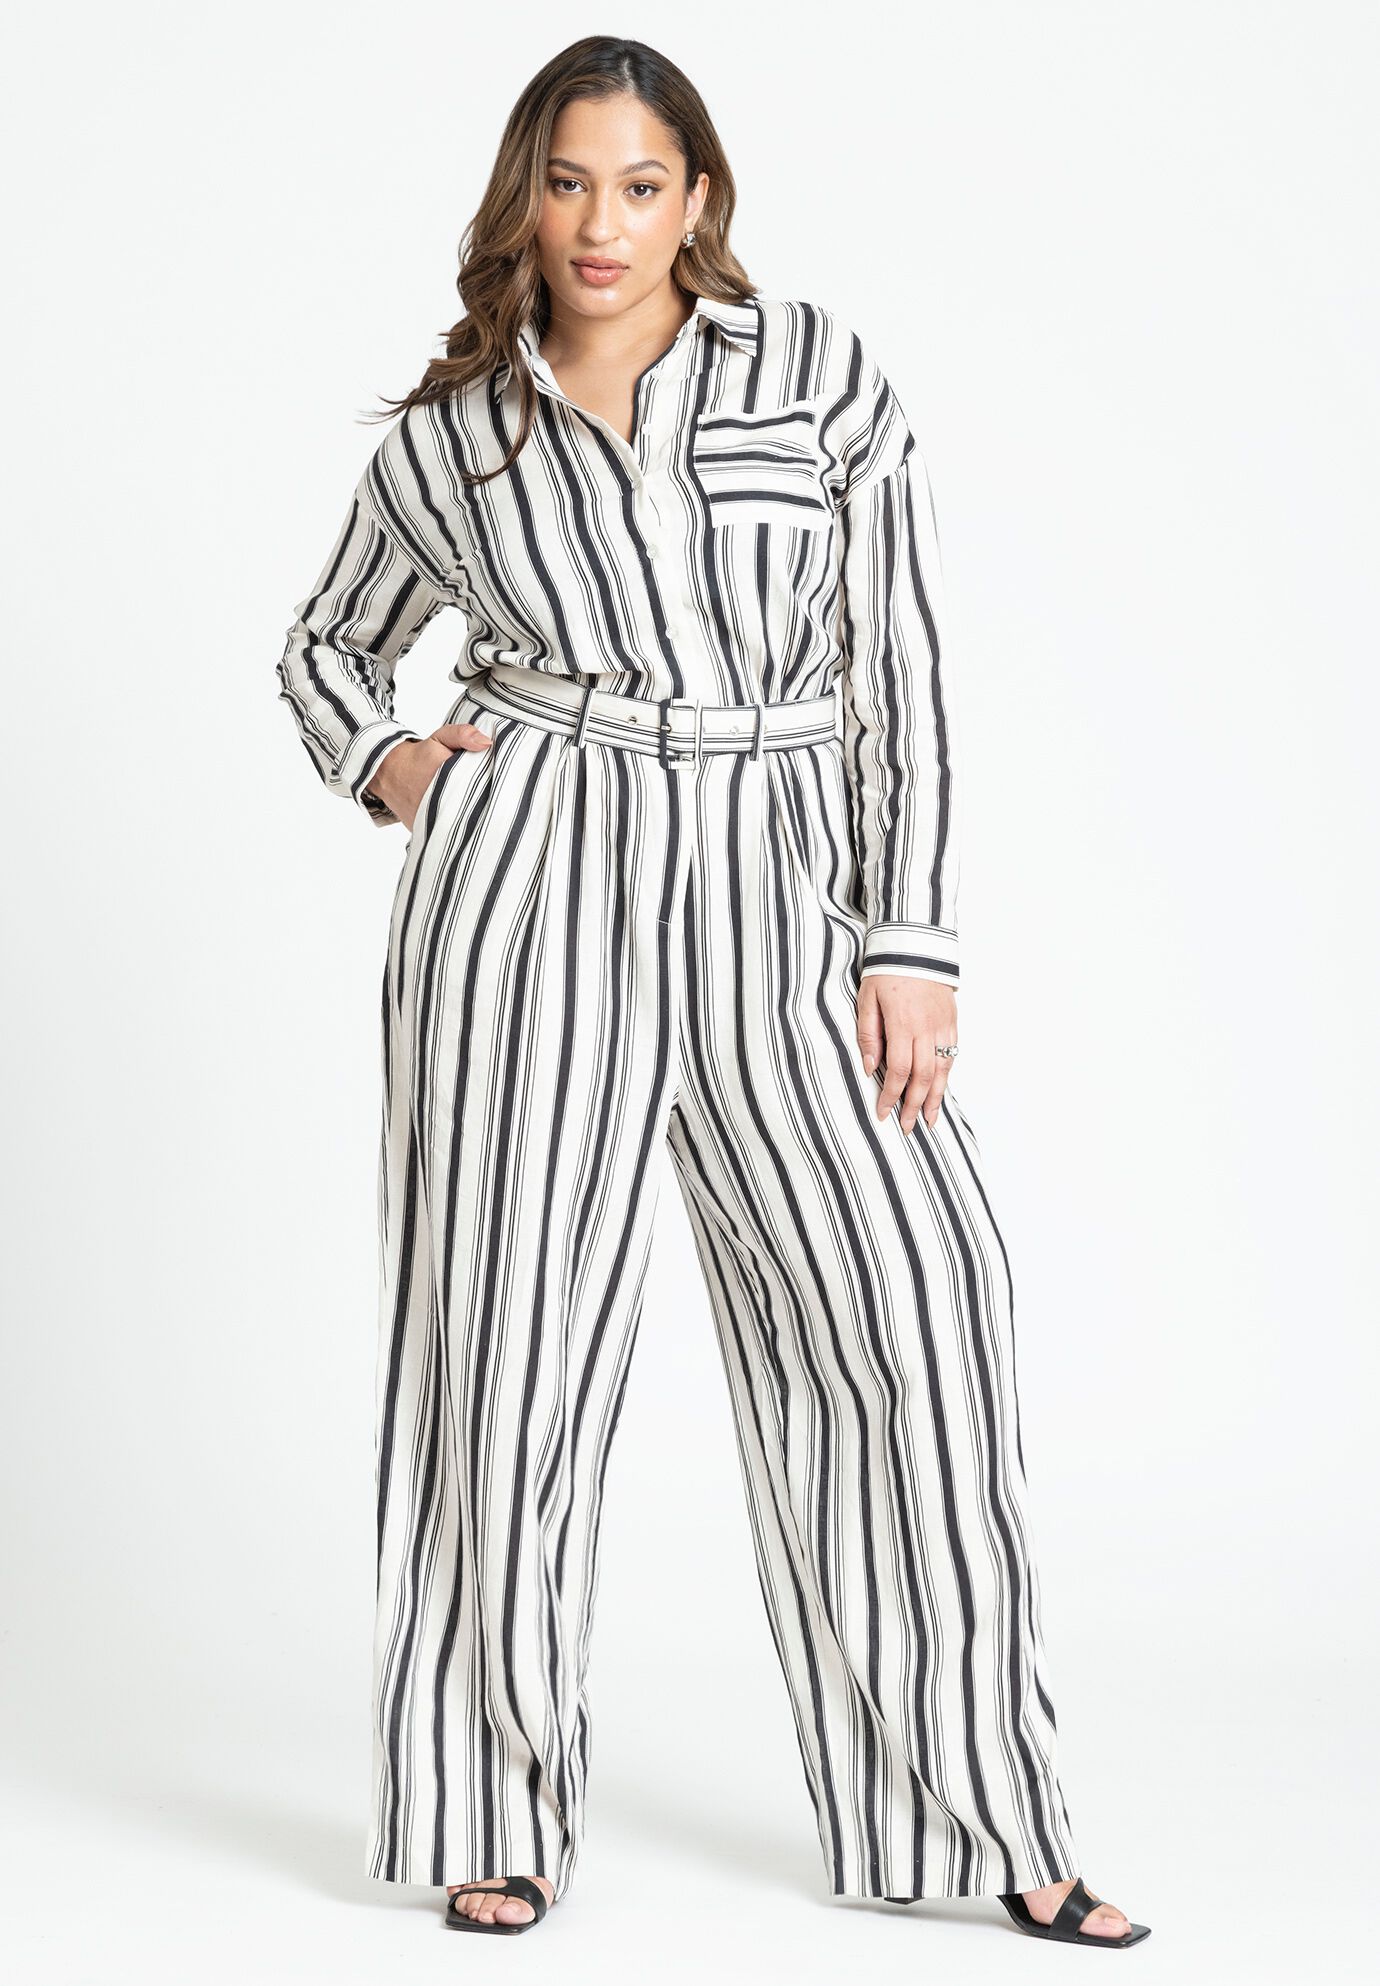 Plus Size Floor Length Long Sleeves Dropped Shoulder Collared Belted Pocketed Pleated Striped Print Jumpsuit